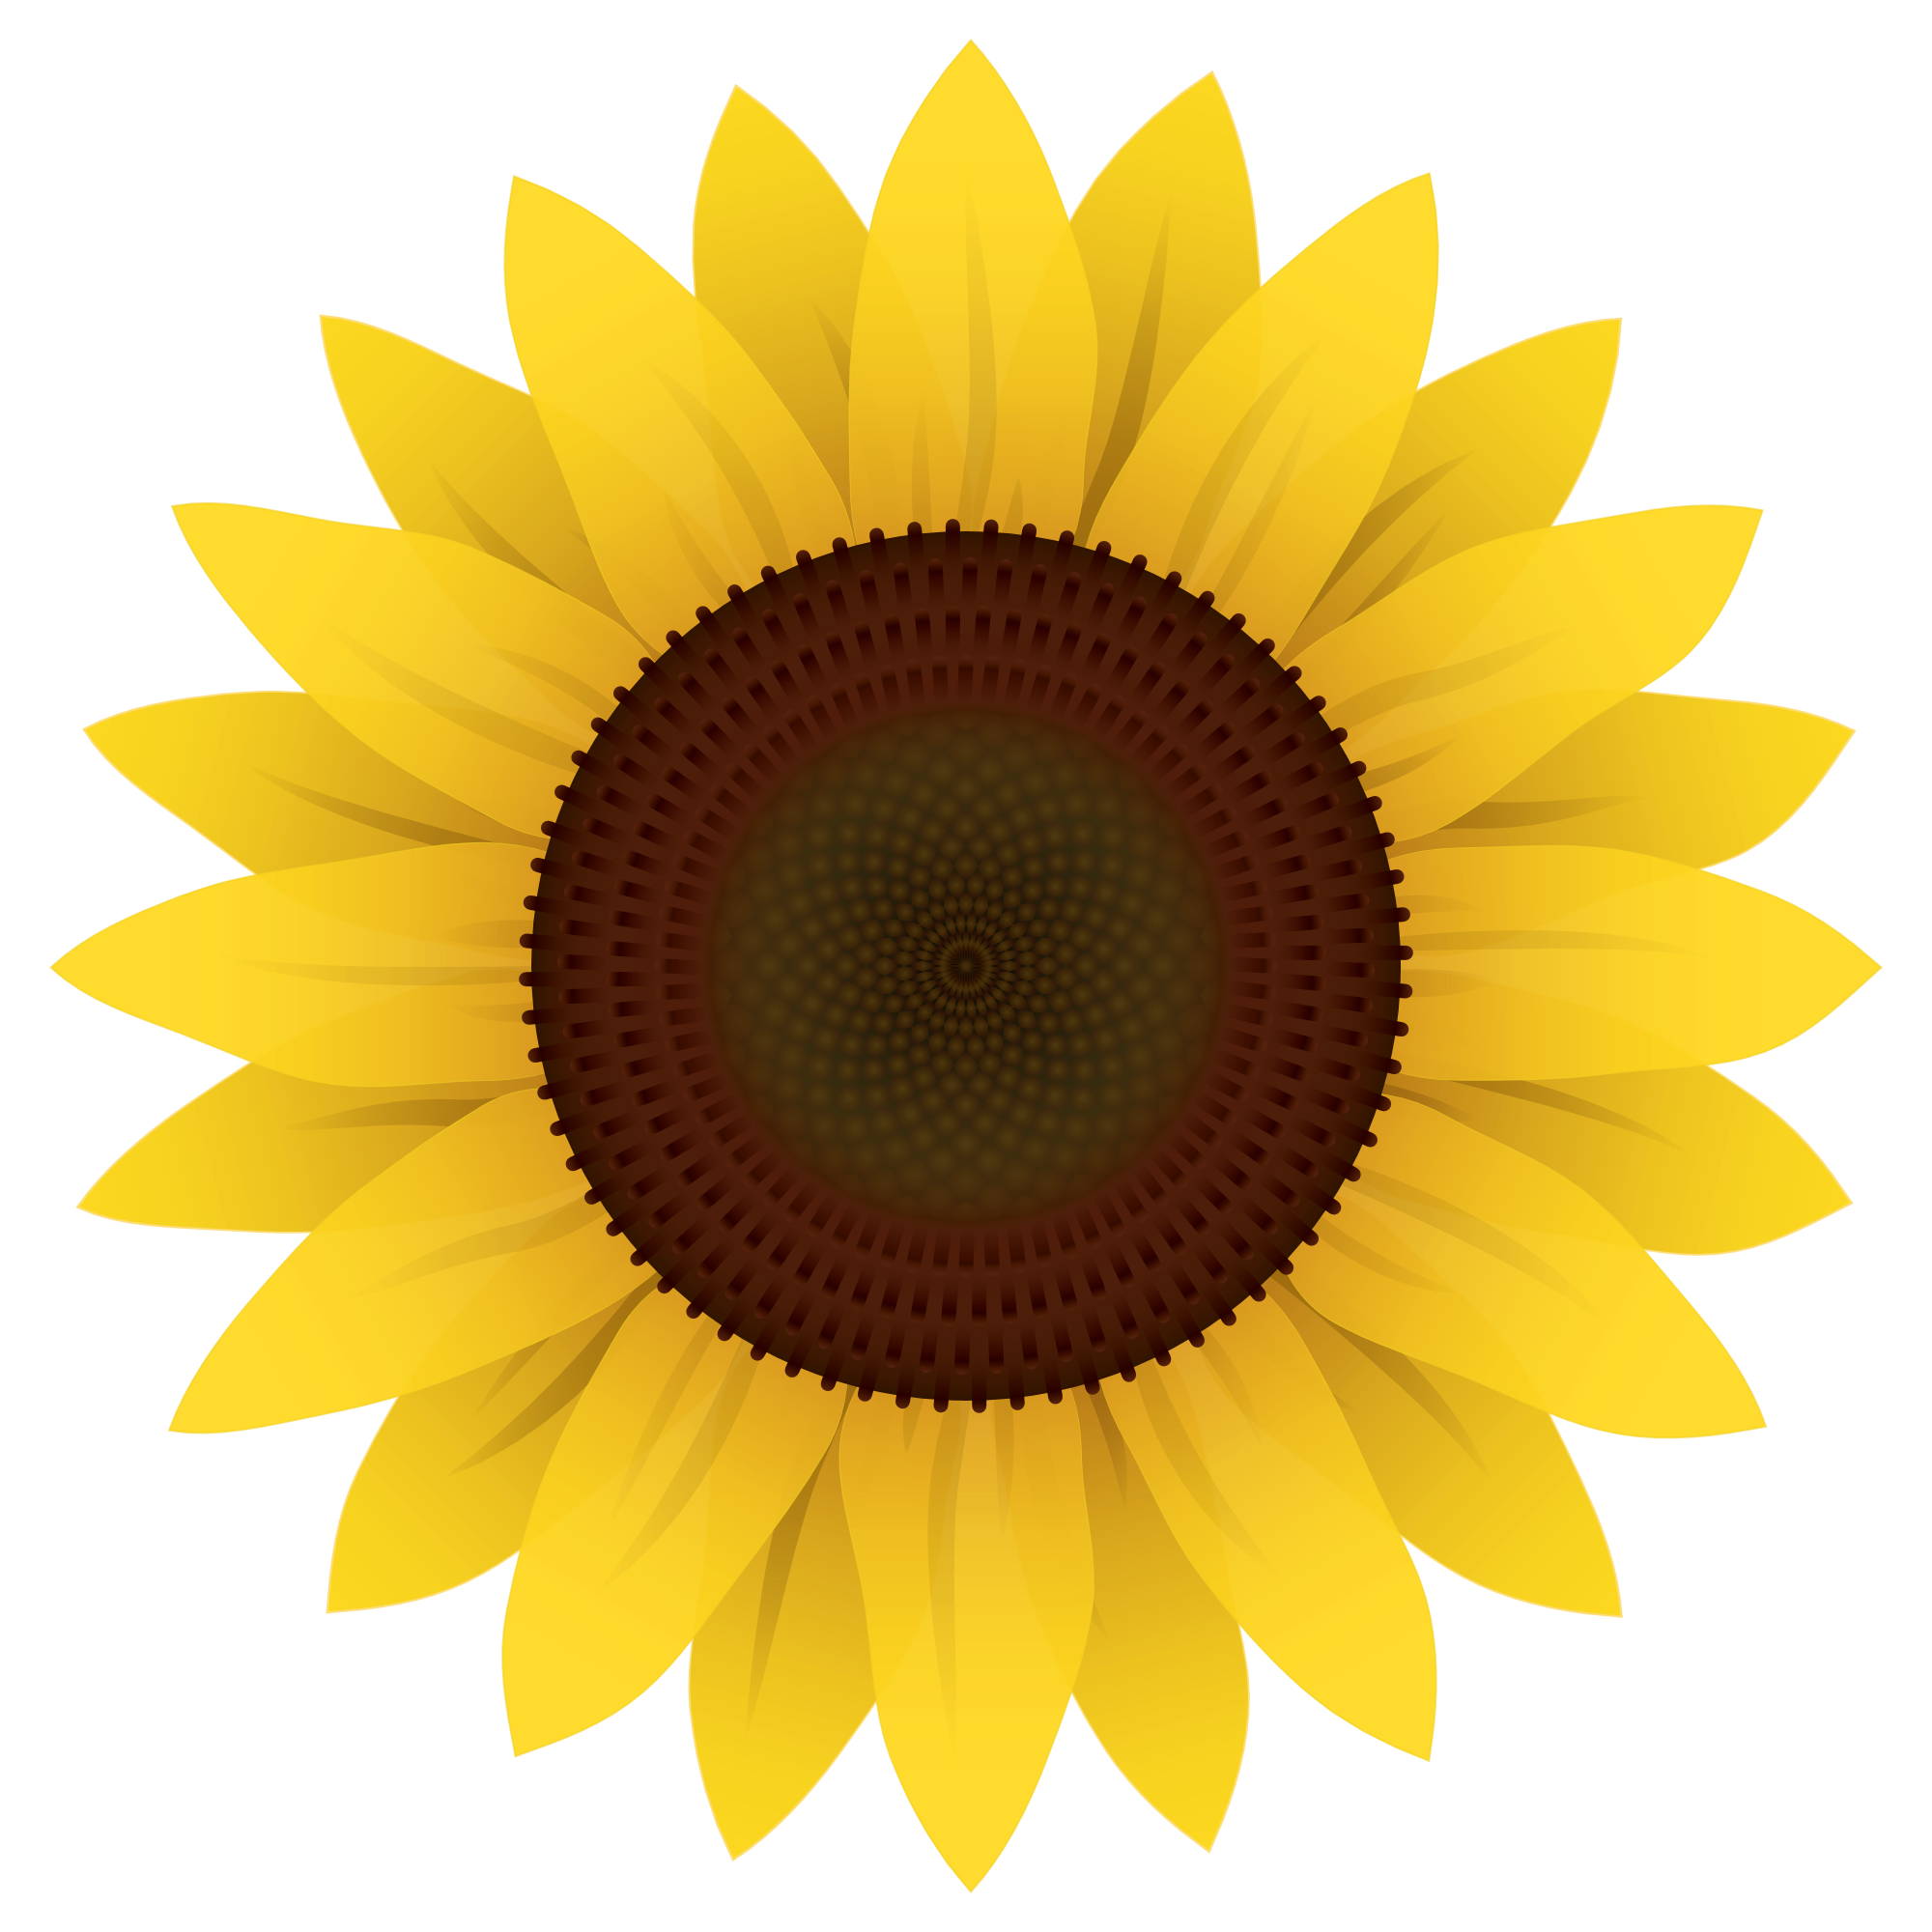 Sunflower Vector PNG Image - PurePNG | Free transparent ...